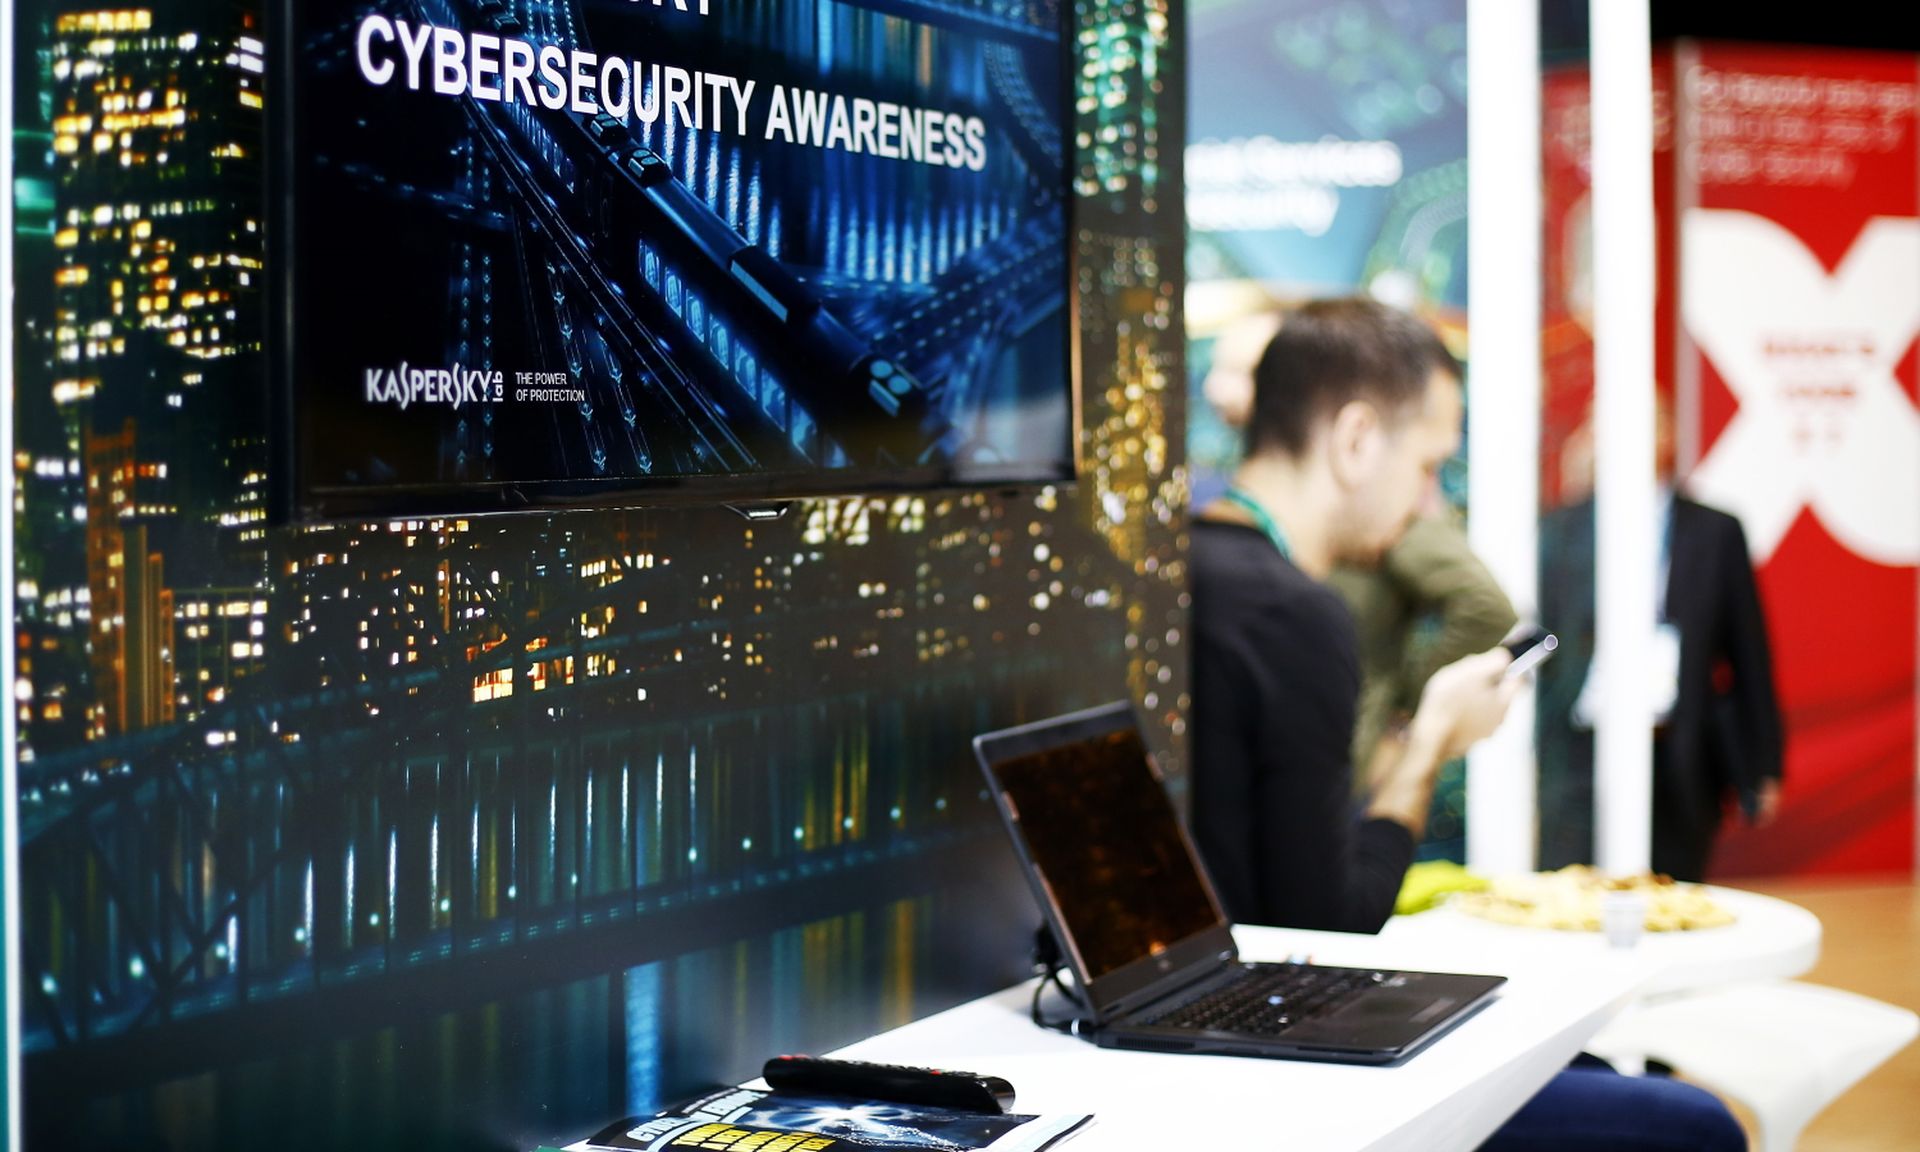 A general view during Kaspersky Lab at Cybertech Europa 2017 in Rome. Chief information security officers are coming out of the pandemic with higher pay and a higher profile, according to a survey of 354 CISOs. (Ernesto S. Ruscio/Getty Images for Kaspersky Lab)